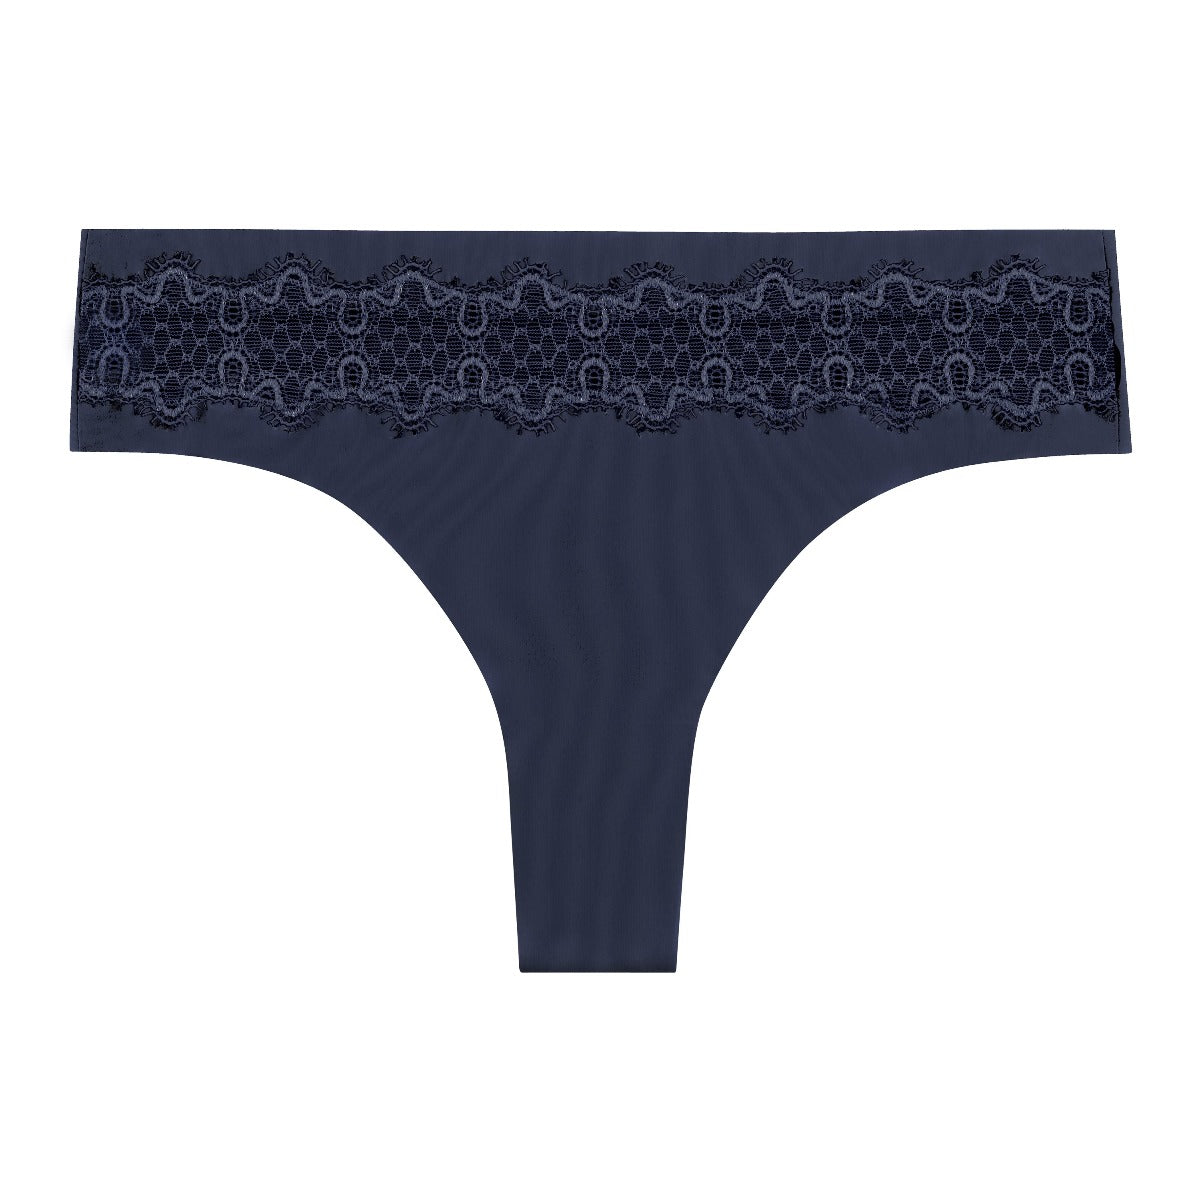 ALDI Serra Ladies Seamless Thong, L Same-Day Delivery or Pickup